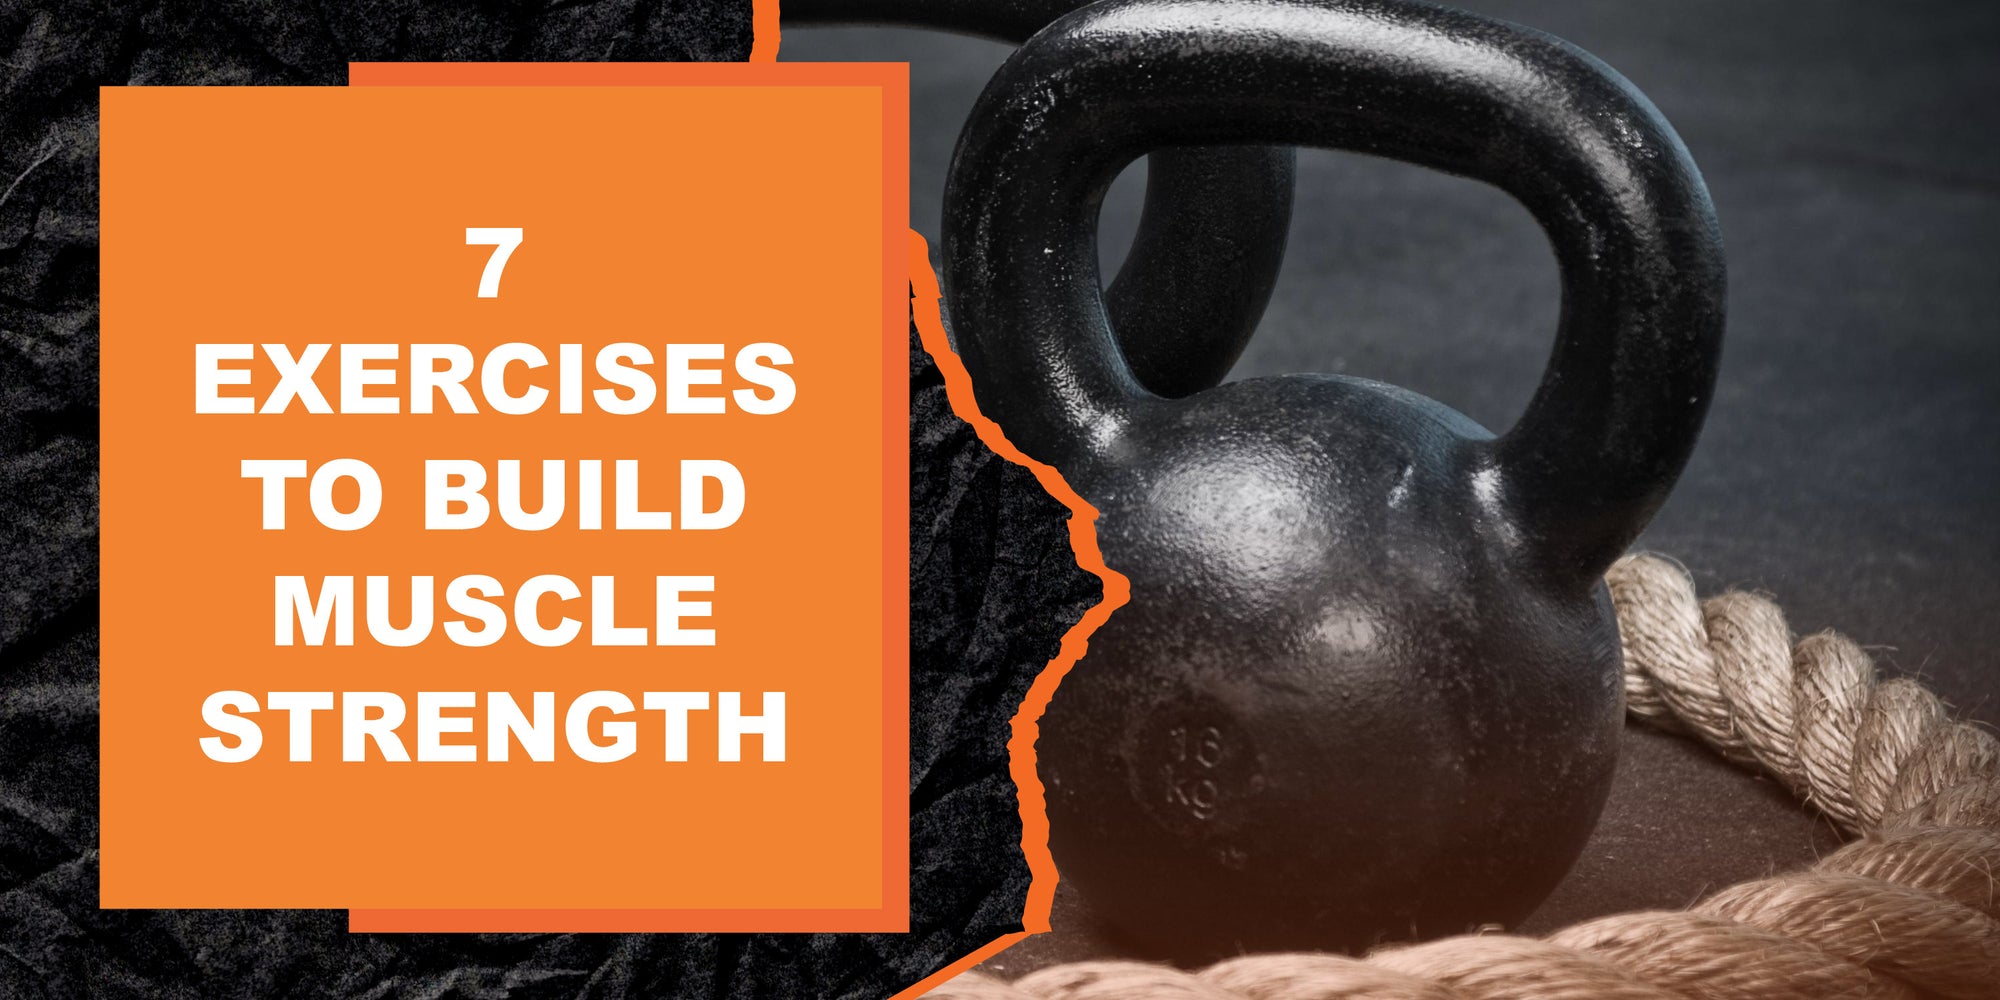 7 Exercises to Build Muscle Strength